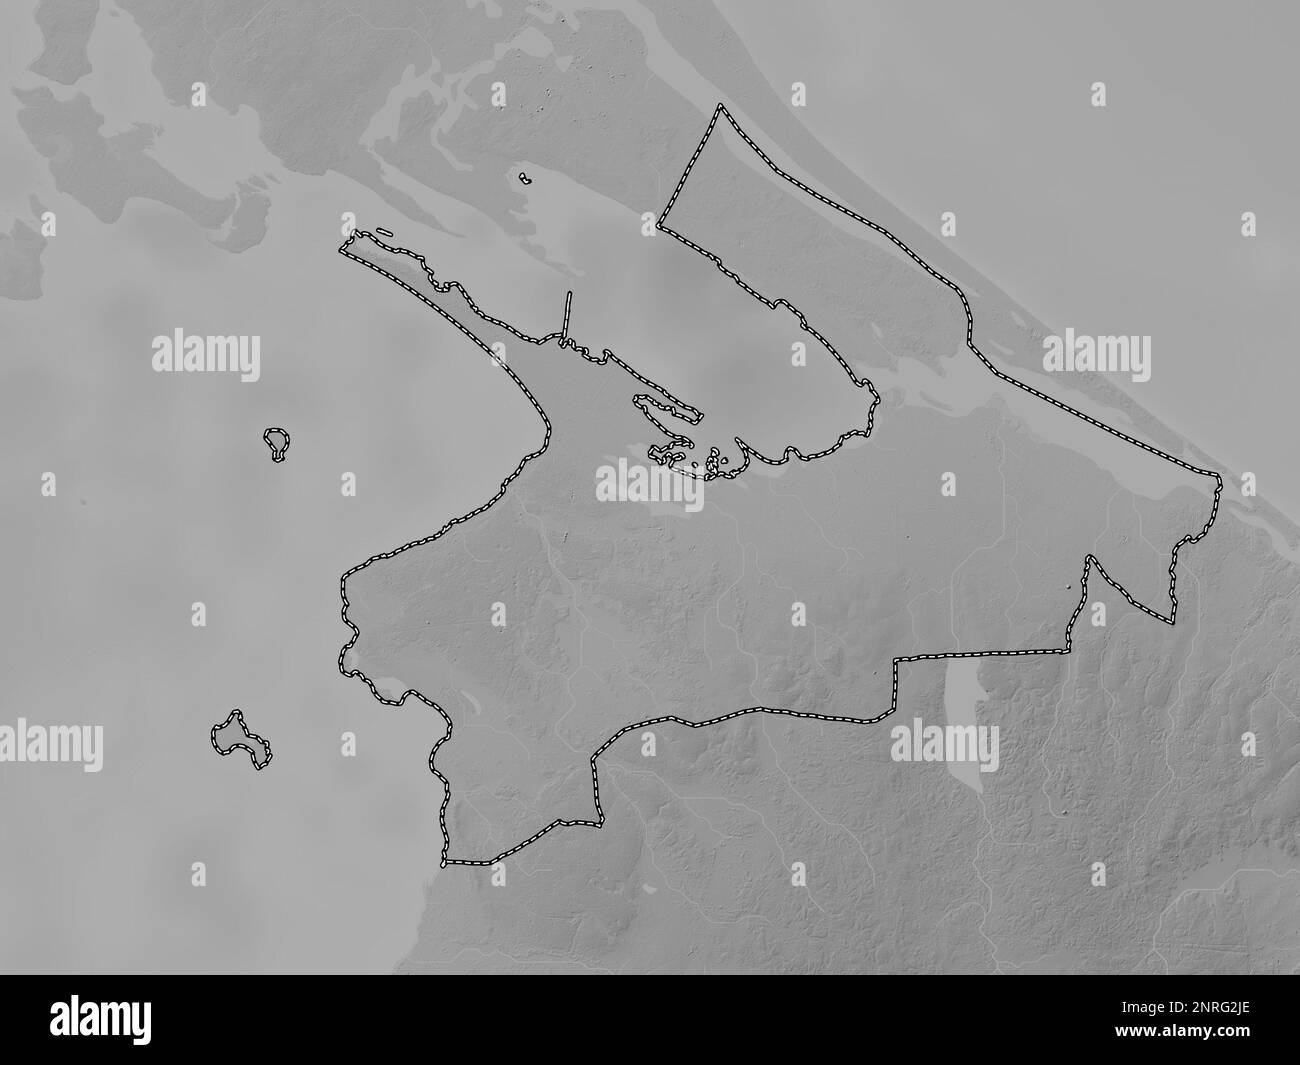 Kilinochchi, district of Sri Lanka. Grayscale elevation map with lakes and rivers Stock Photo